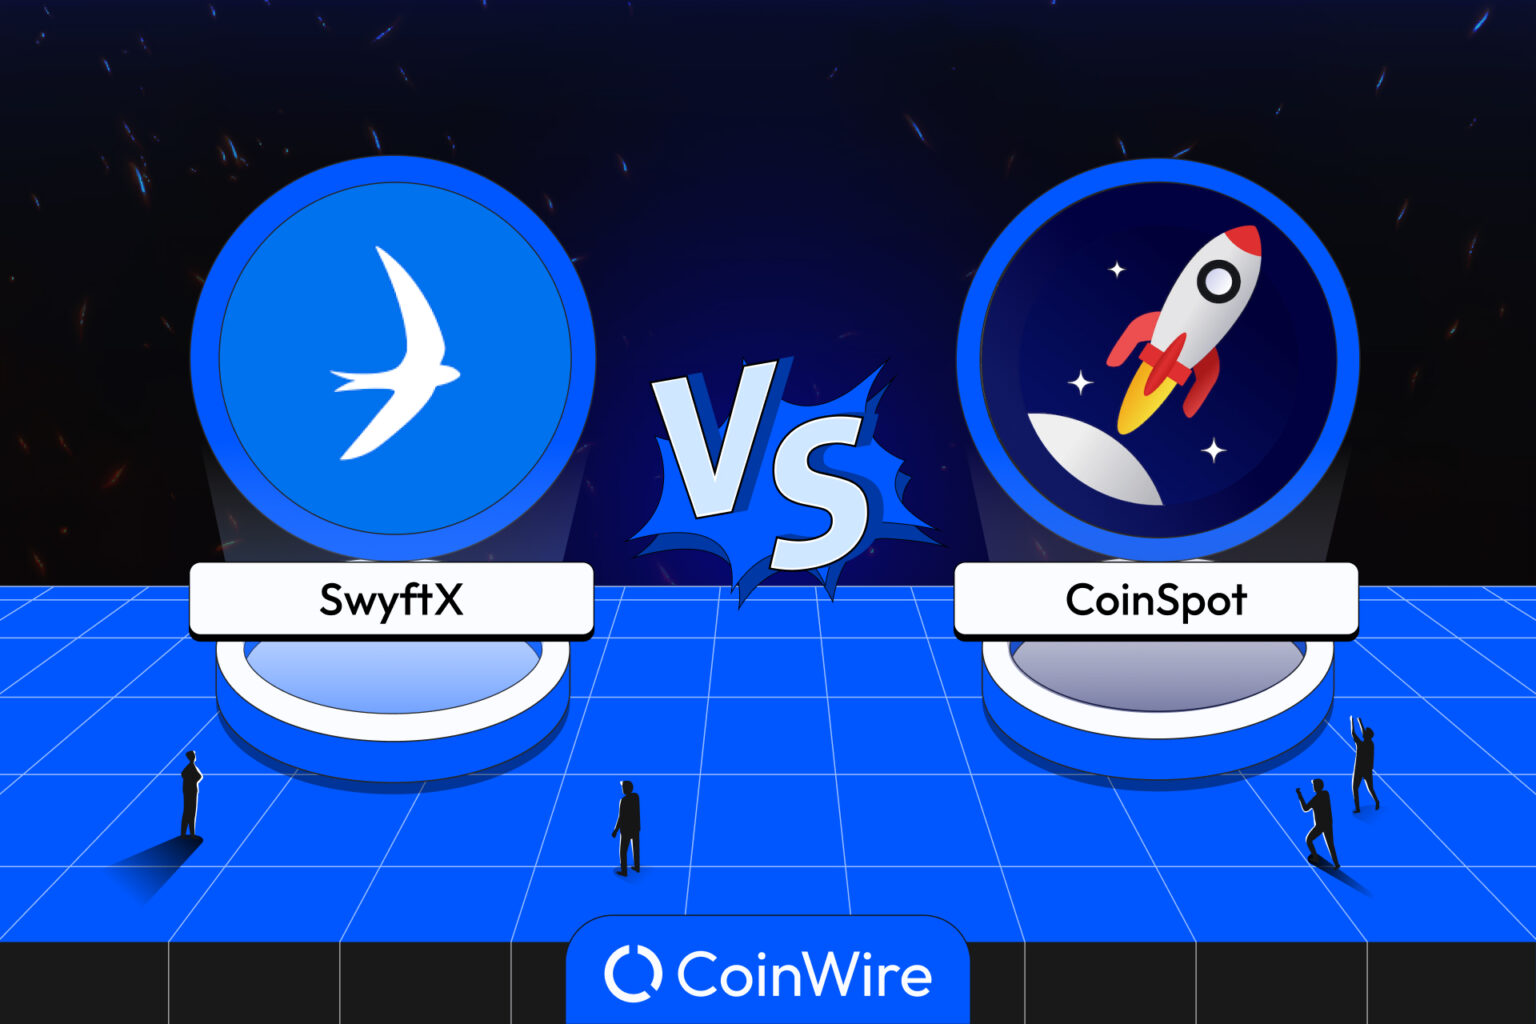 Swyftx Vs Coinspot Featured Image 1536x1024 